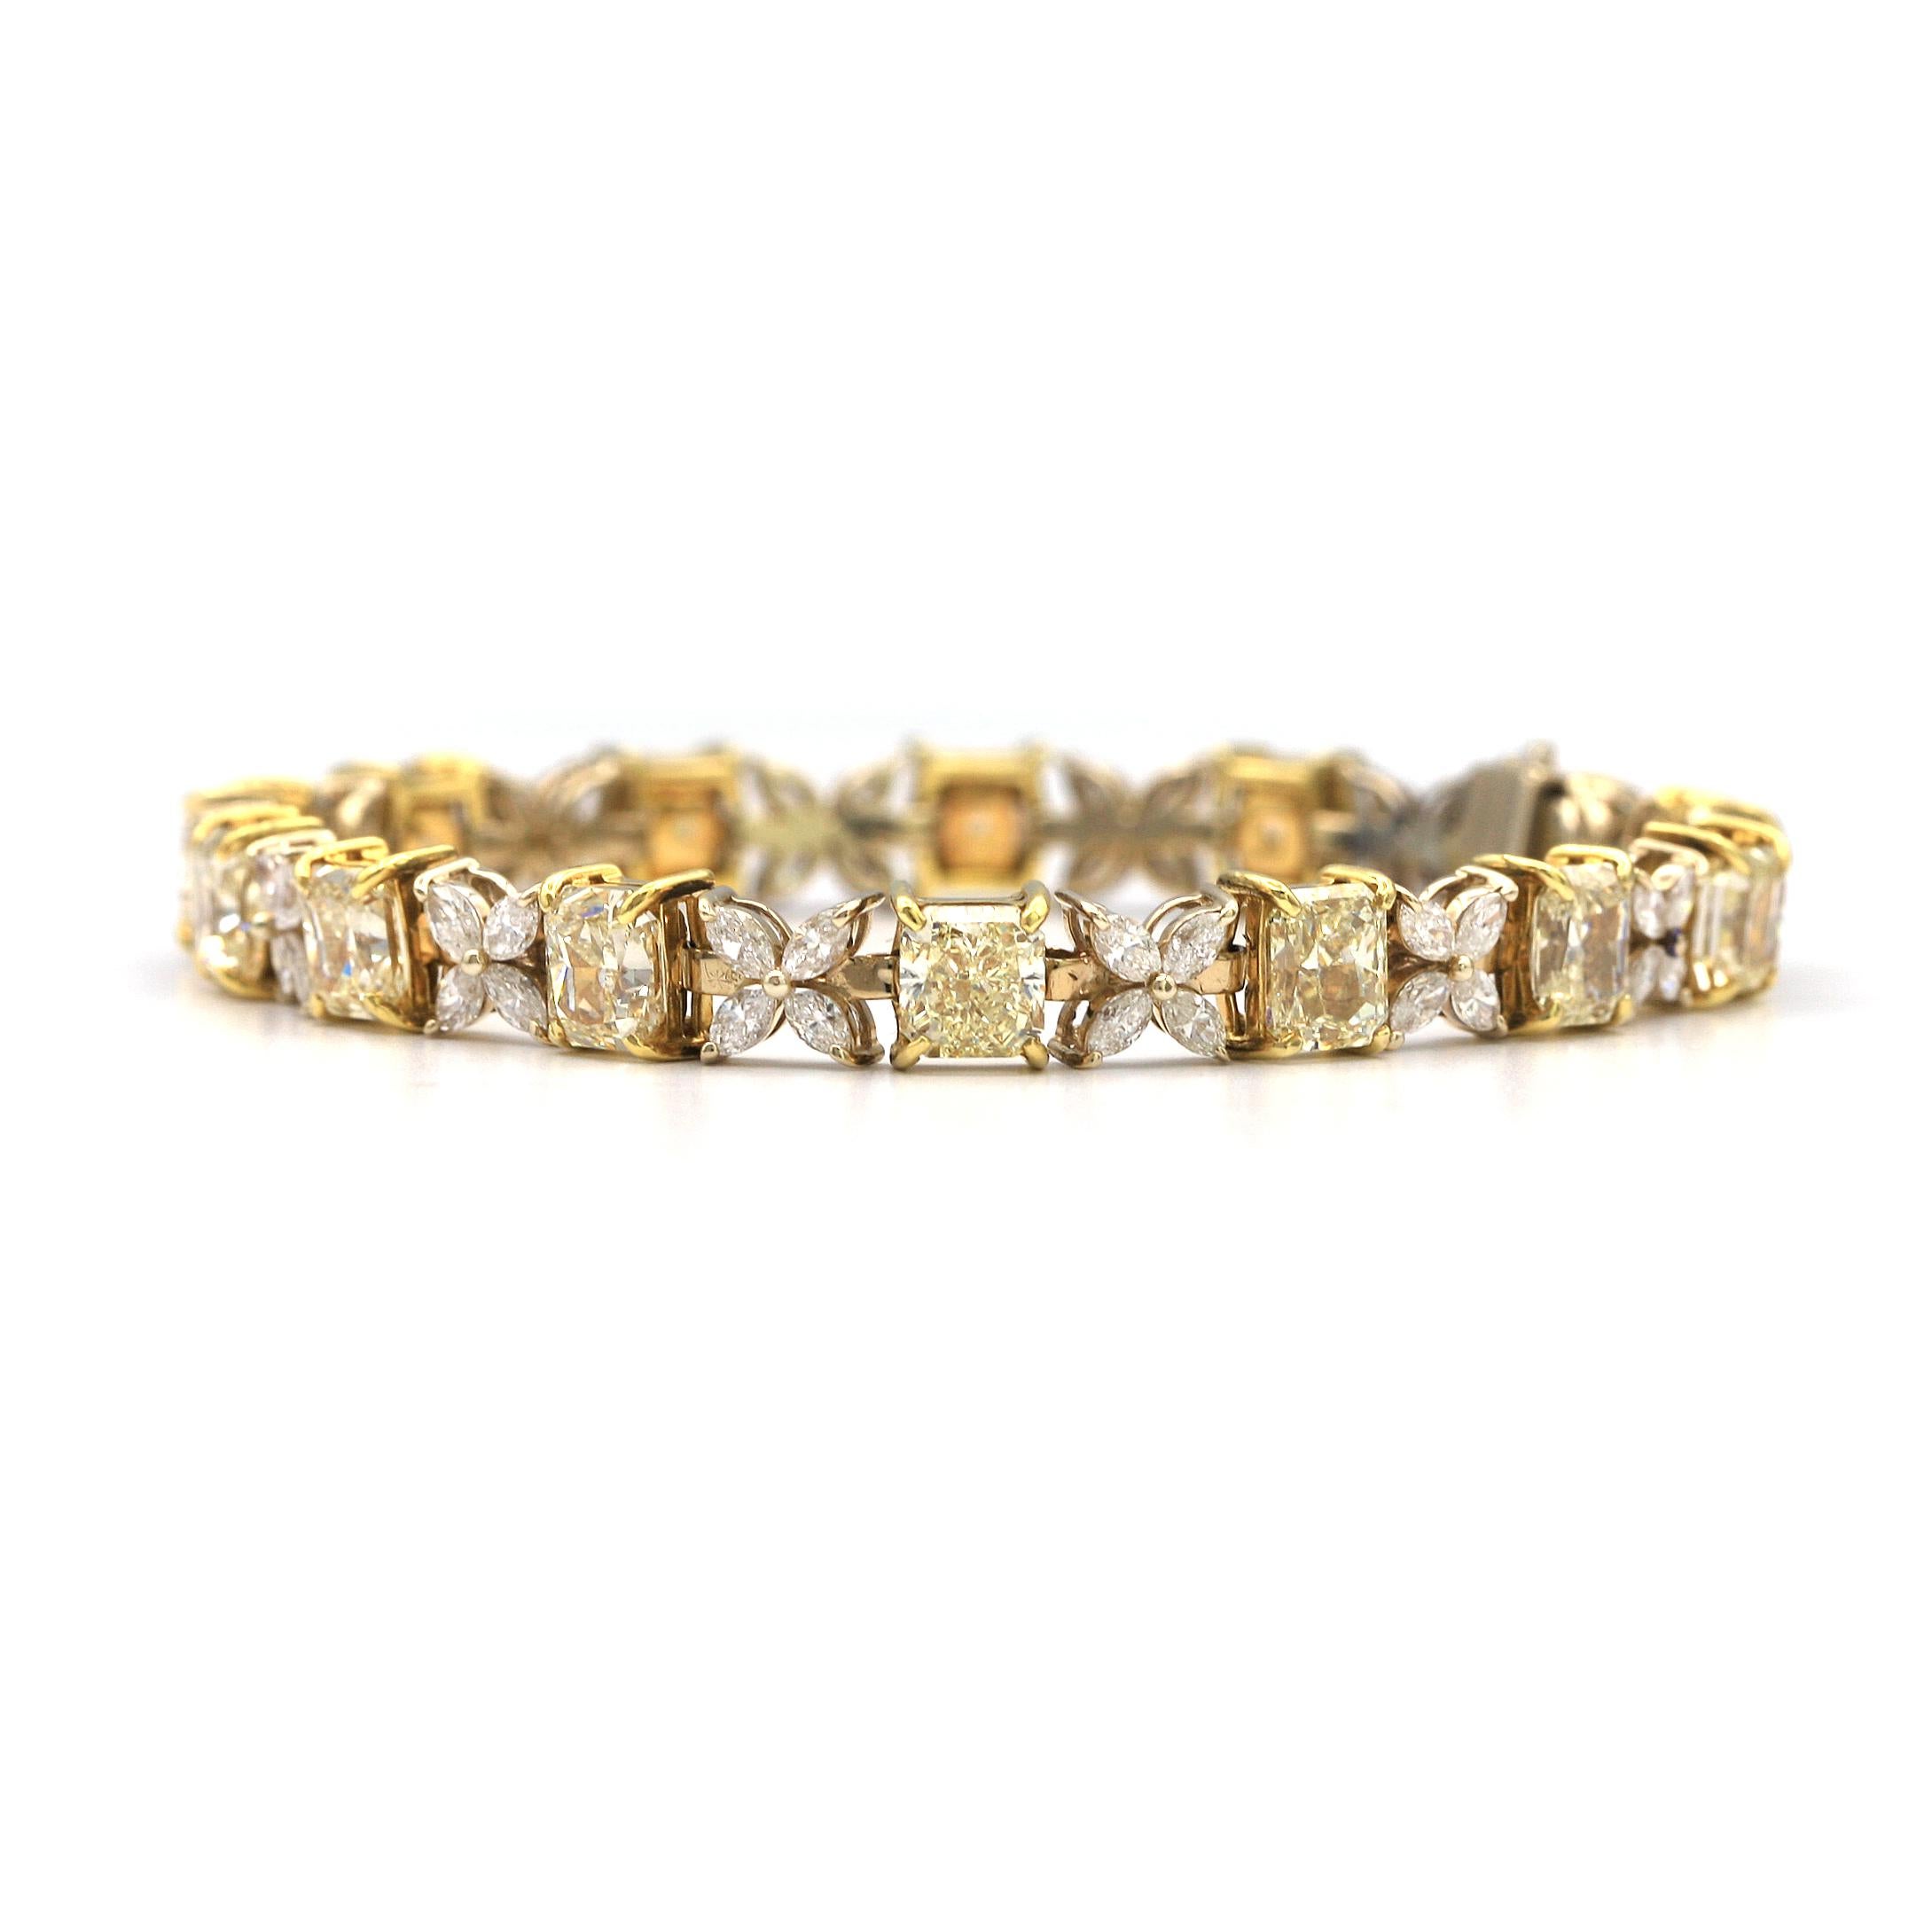 Contemporary 13.99 Carat Radiant Fancy Yellow and White Diamonds Bracelet in 18 Karat For Sale